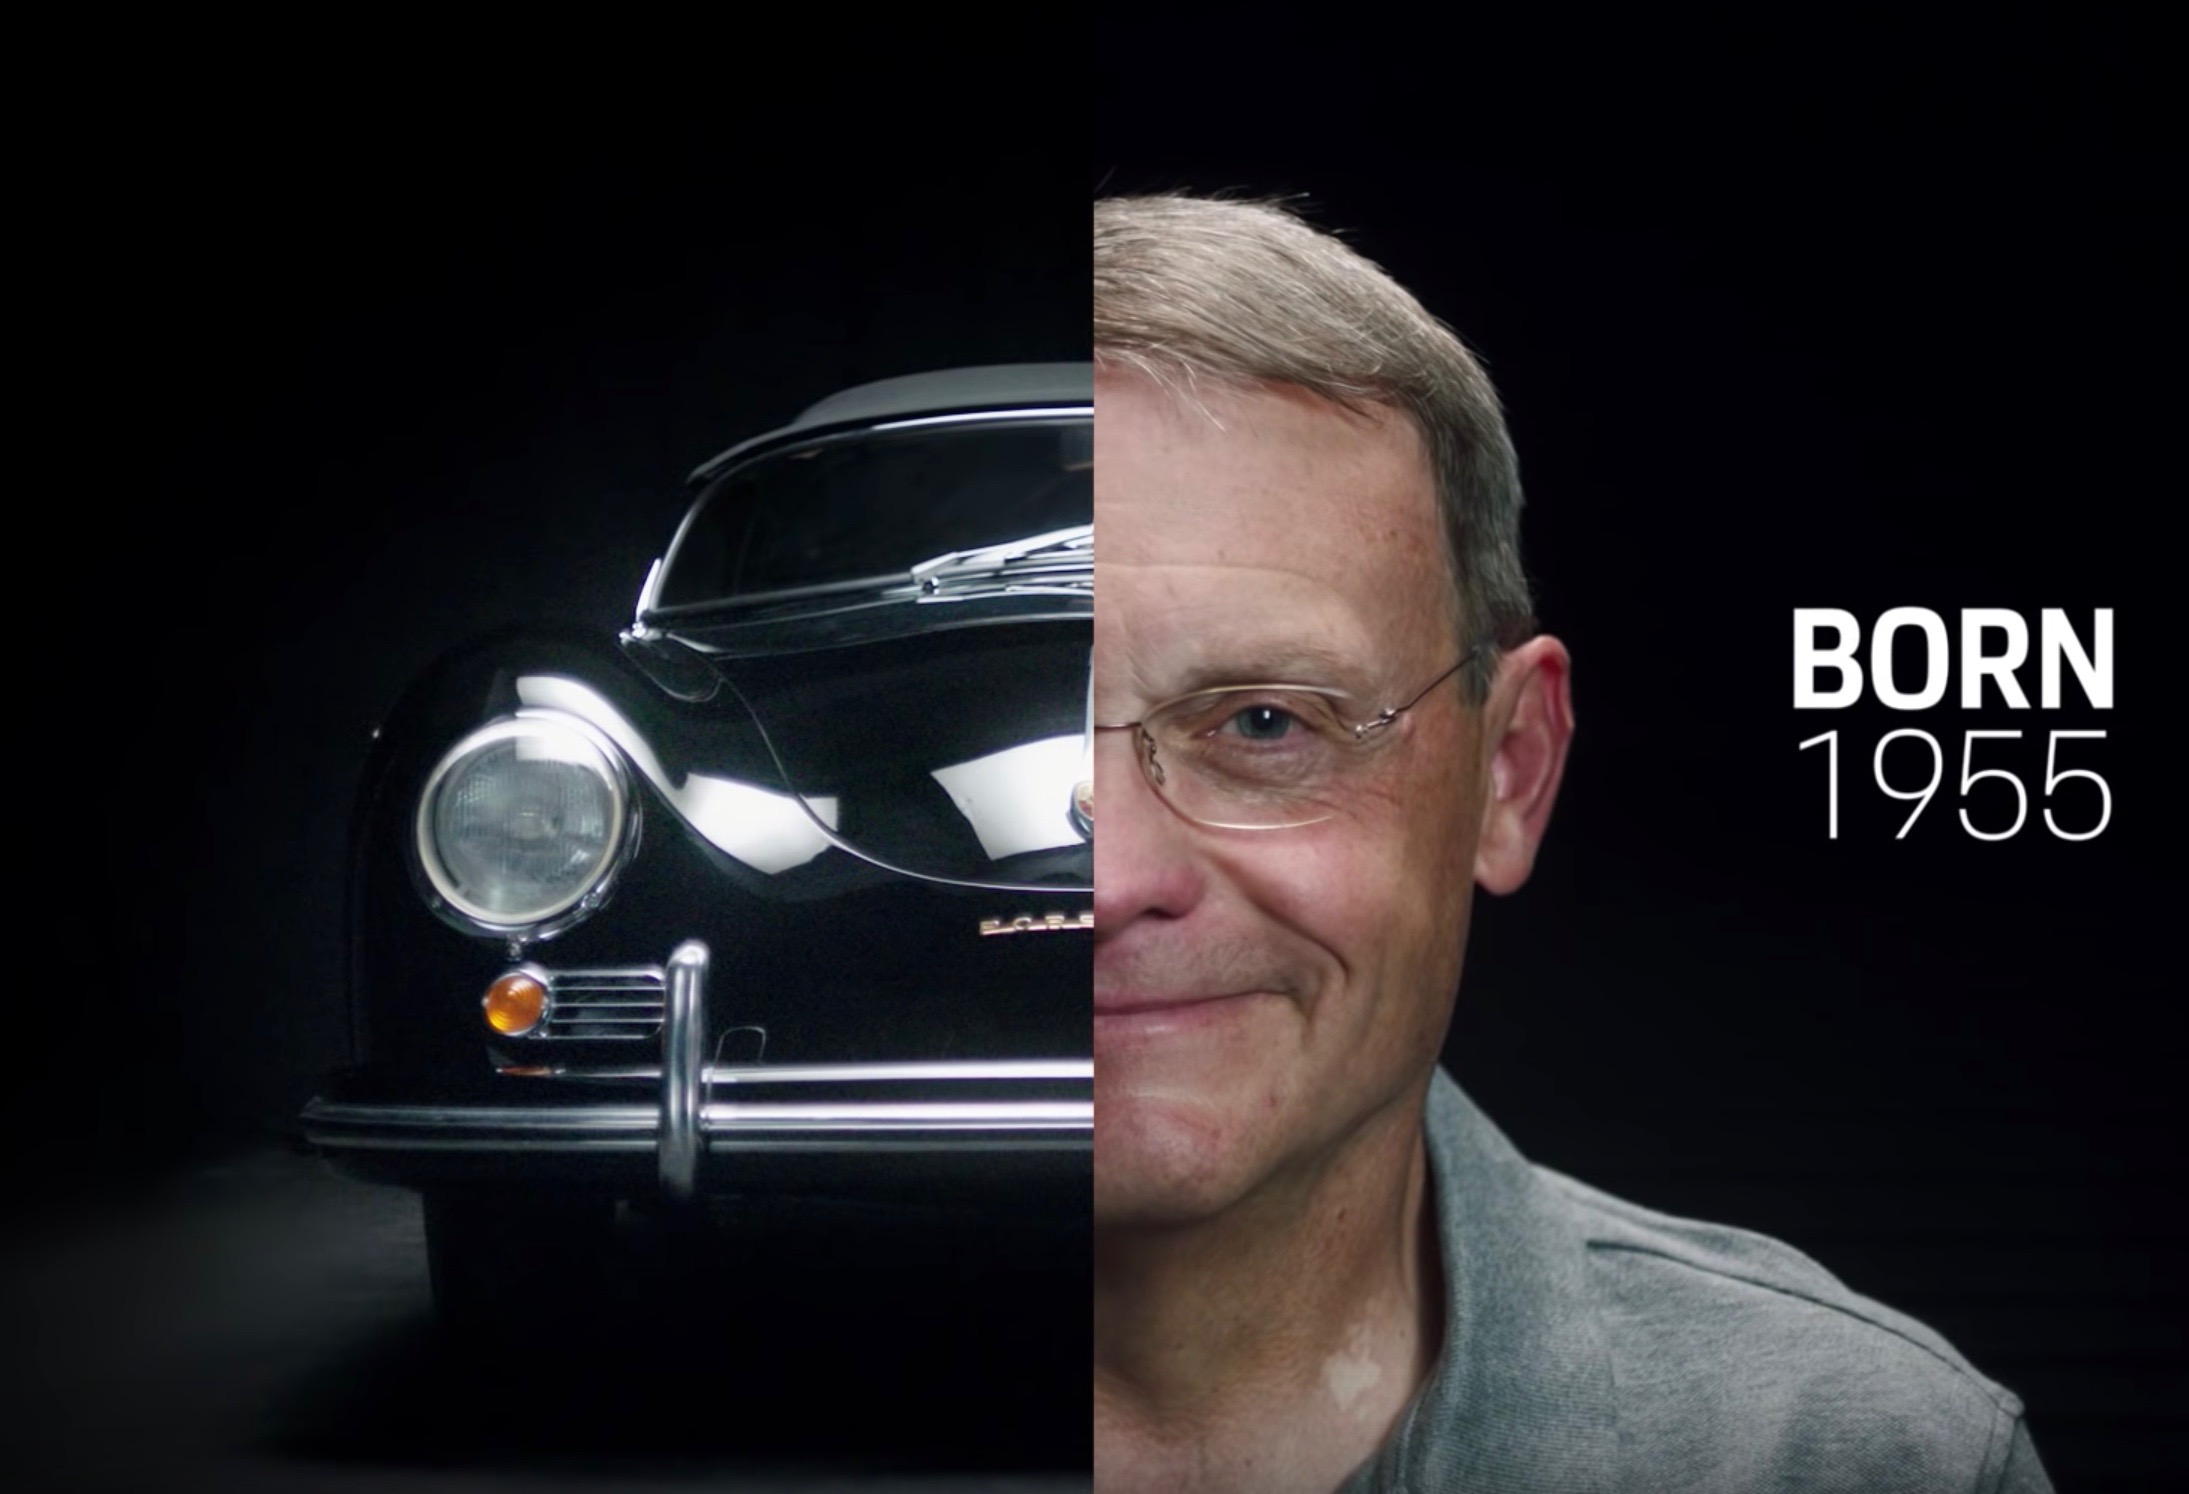 Video: Porsche celebrates 70th anniversary with its fans